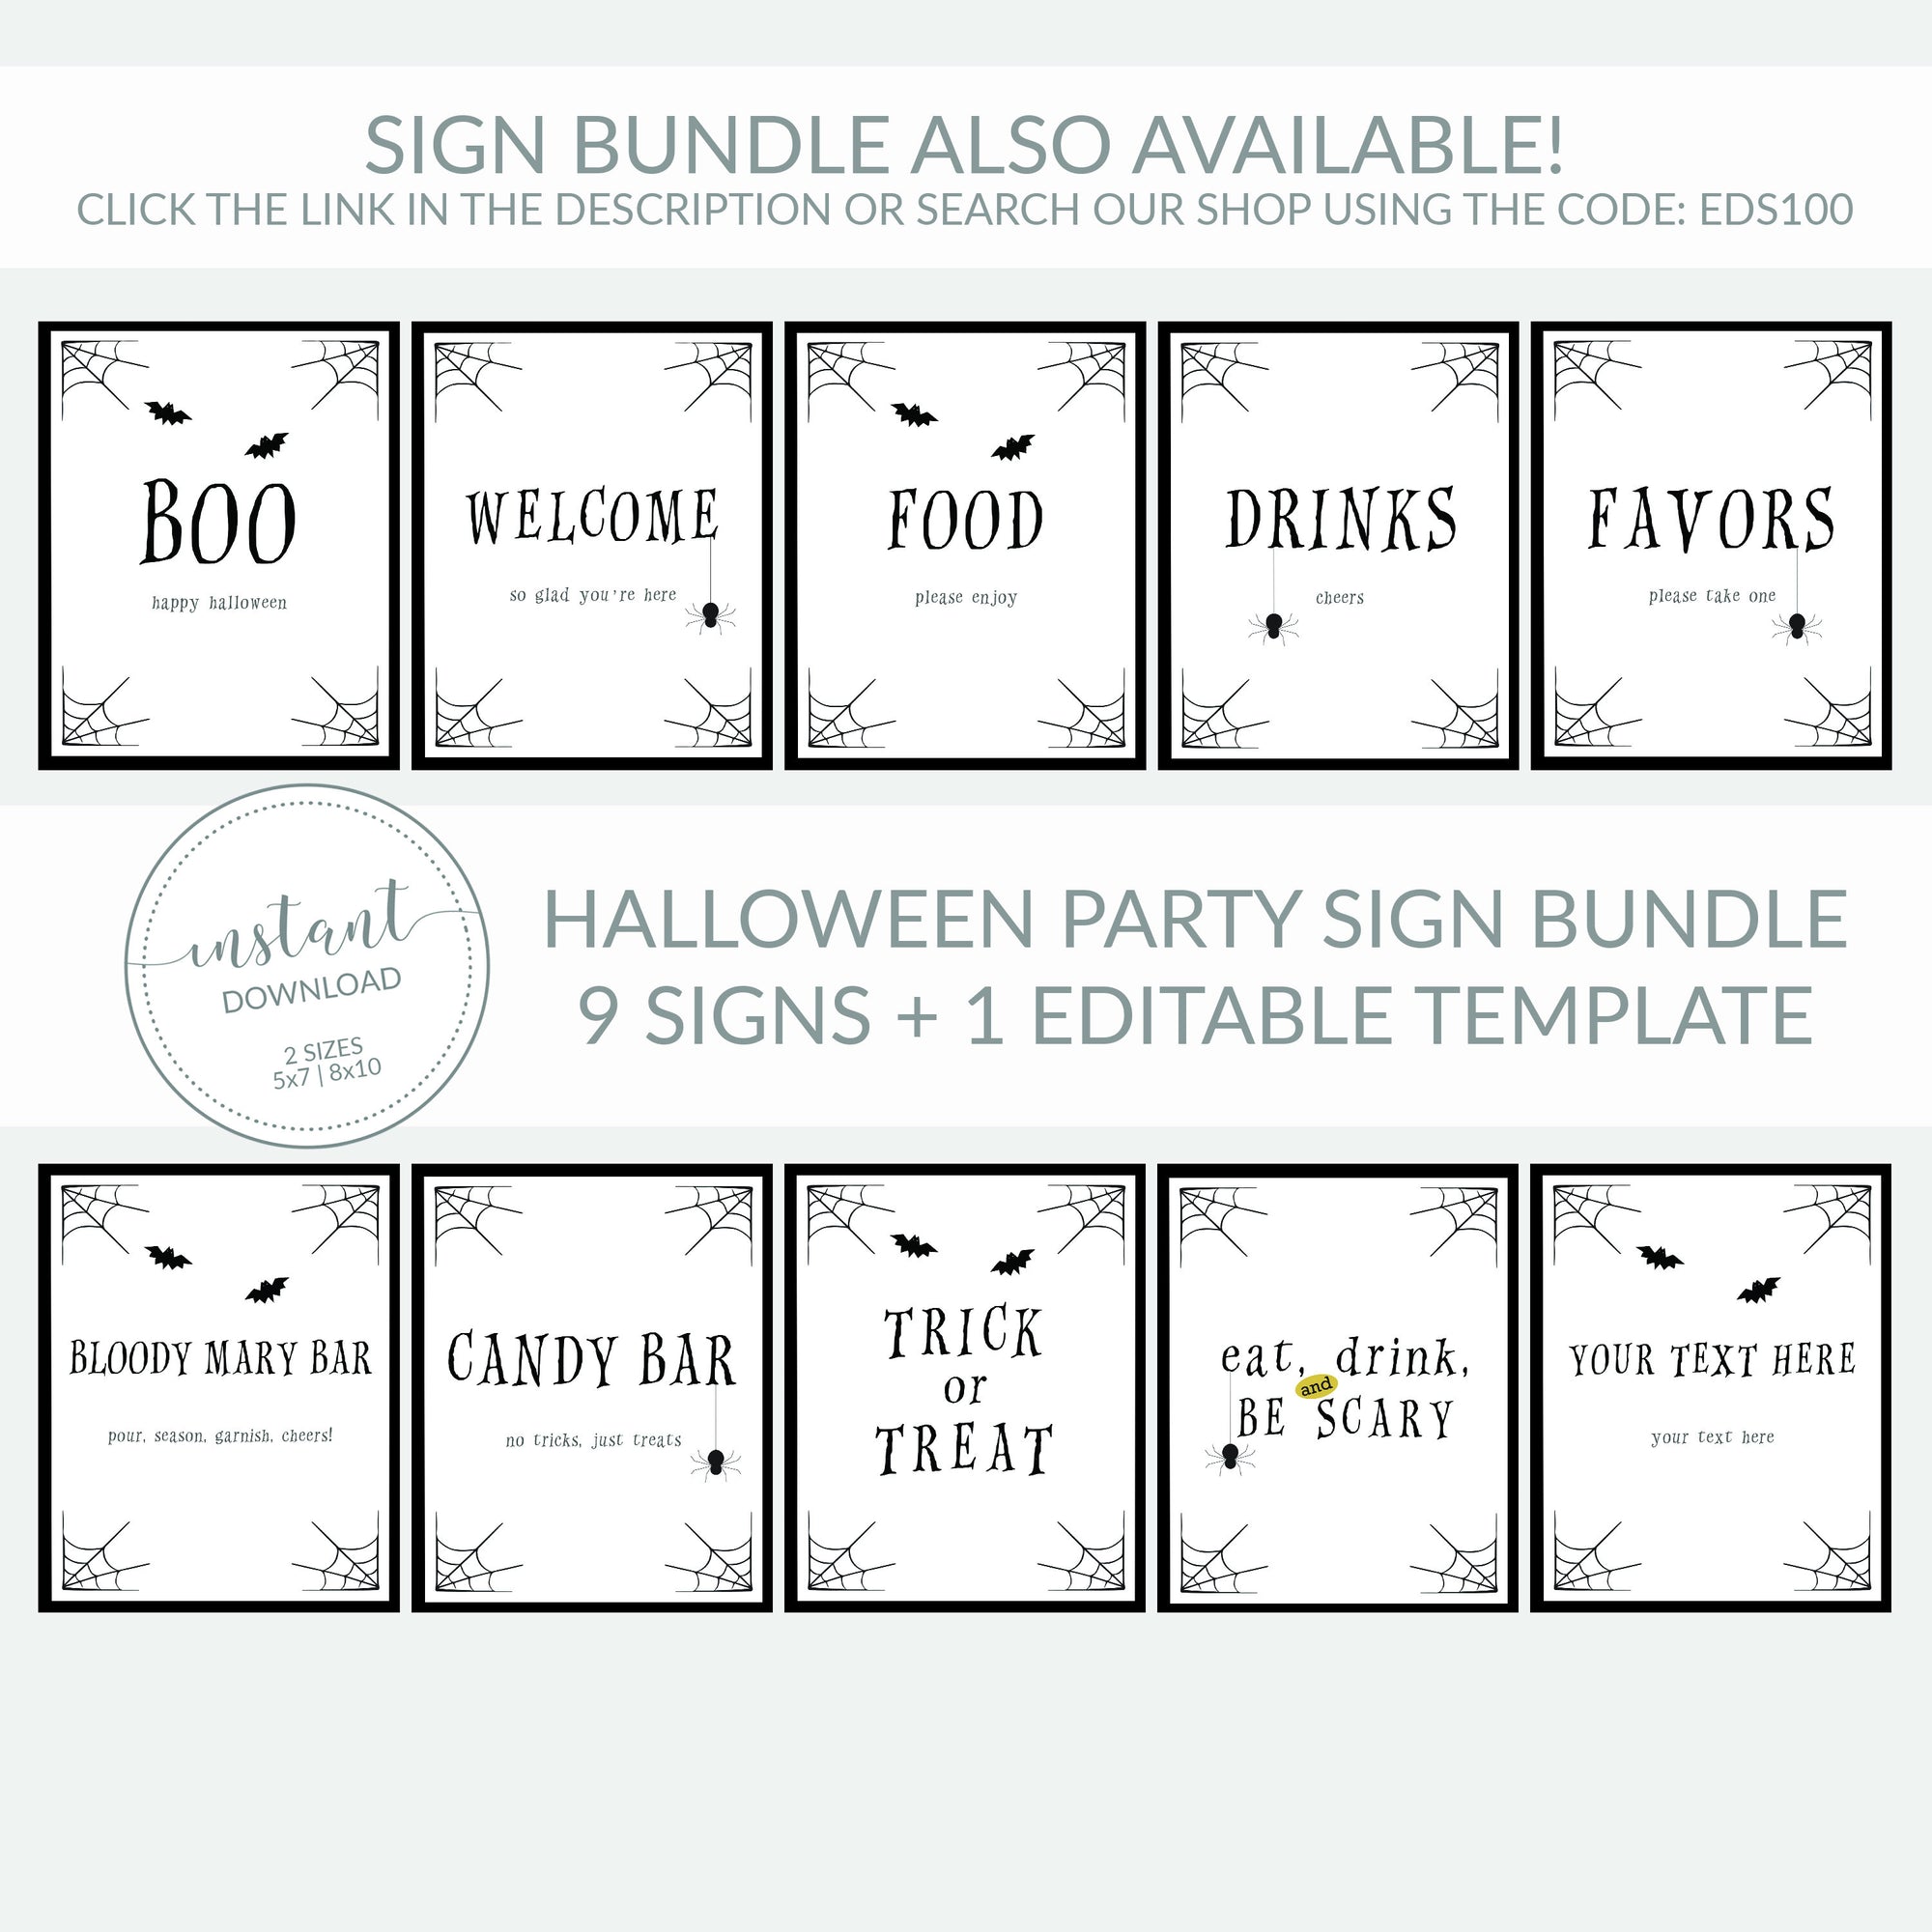 Halloween Sanitize Before Entering Sign Printable, Halloween Welcome Sign, INSTANT DOWNLOAD - EDS100